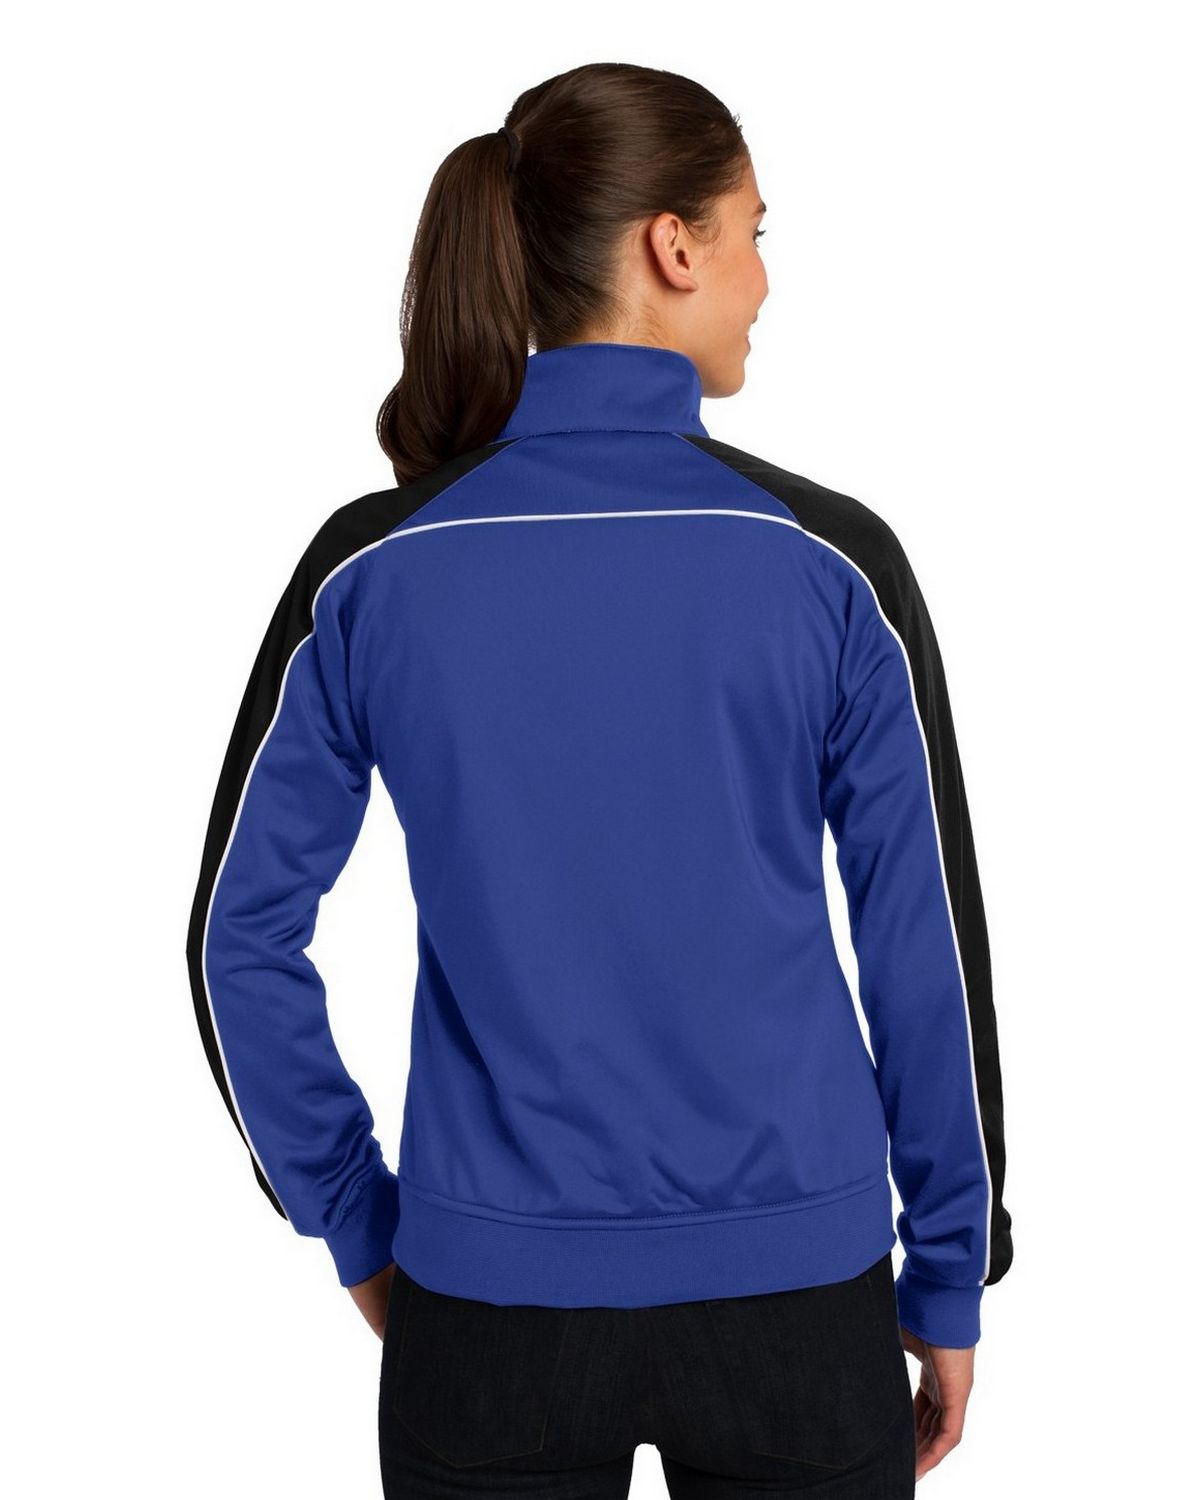 Sport-Tek LST92 Ladies Piped Tricot Track Jacket by Port Authority